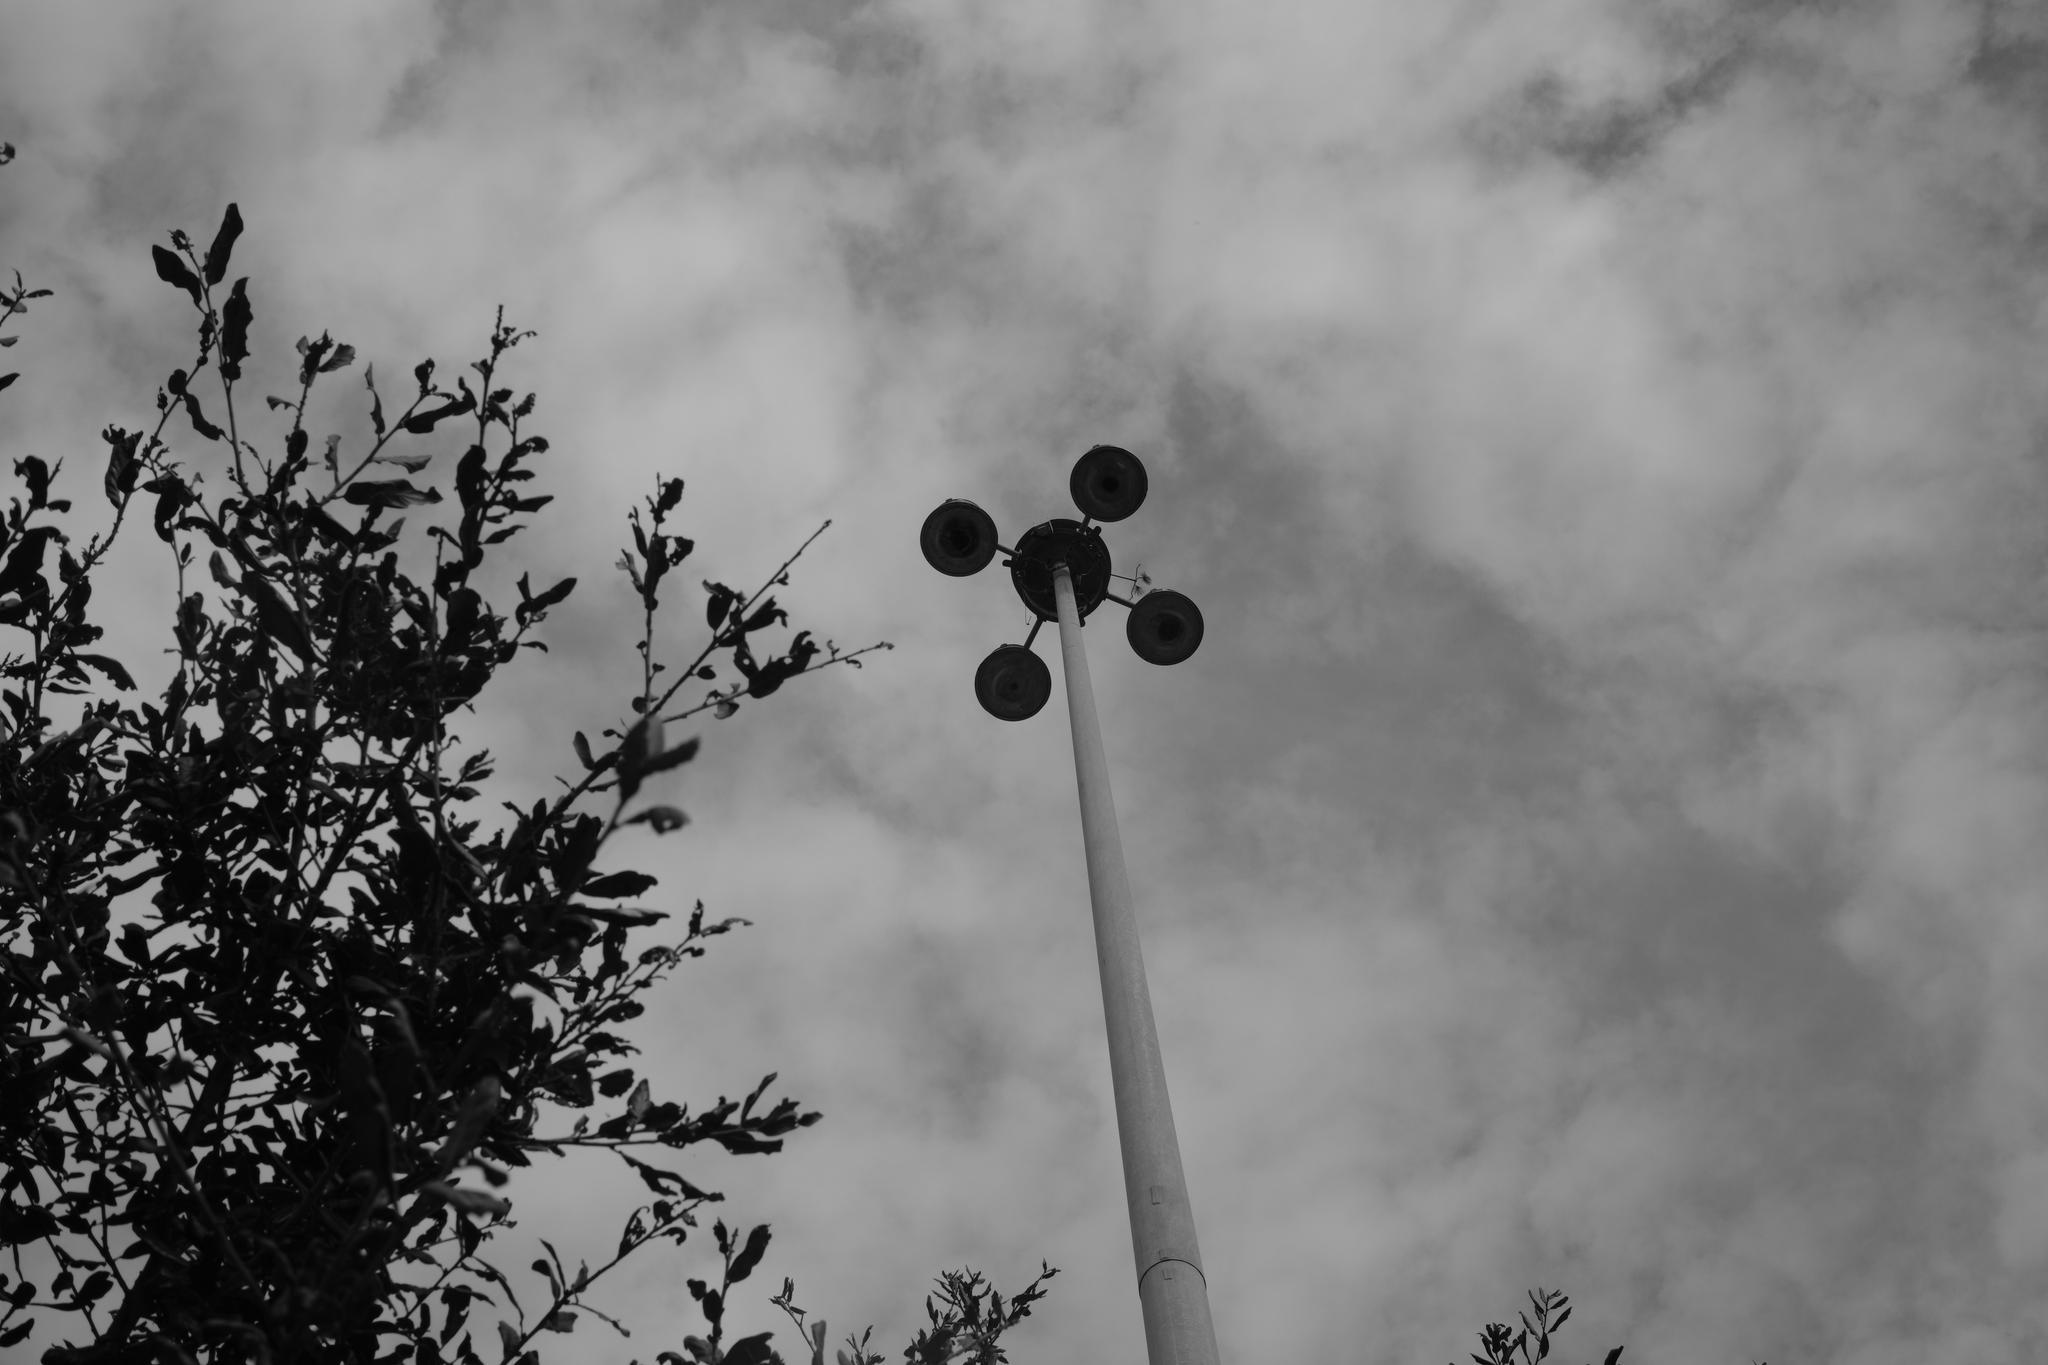 A tall streetlight with multiple lamps, viewed from below against a cloudy sky, with tree branches on the left side